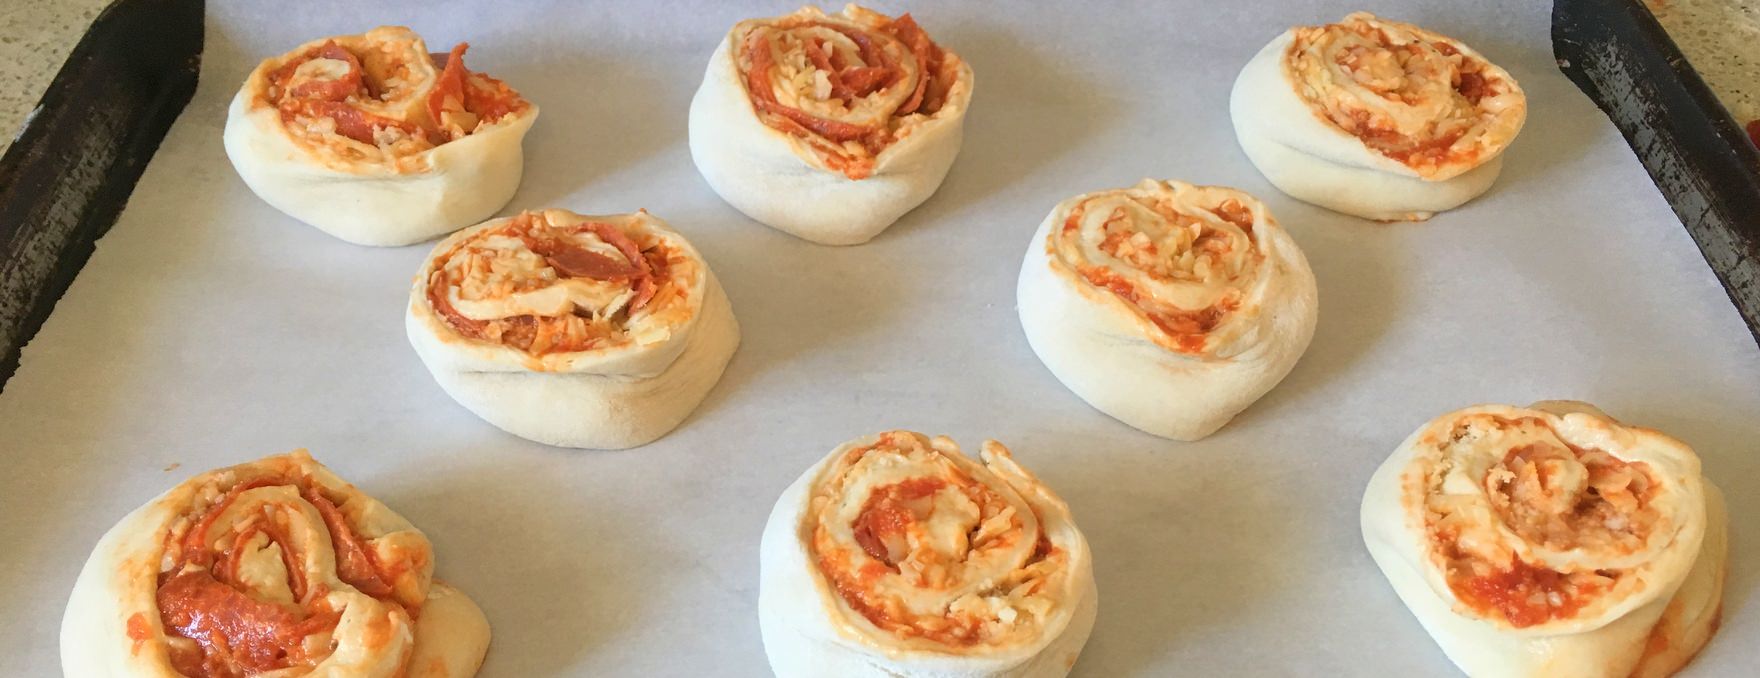 Uncooked pizza buns